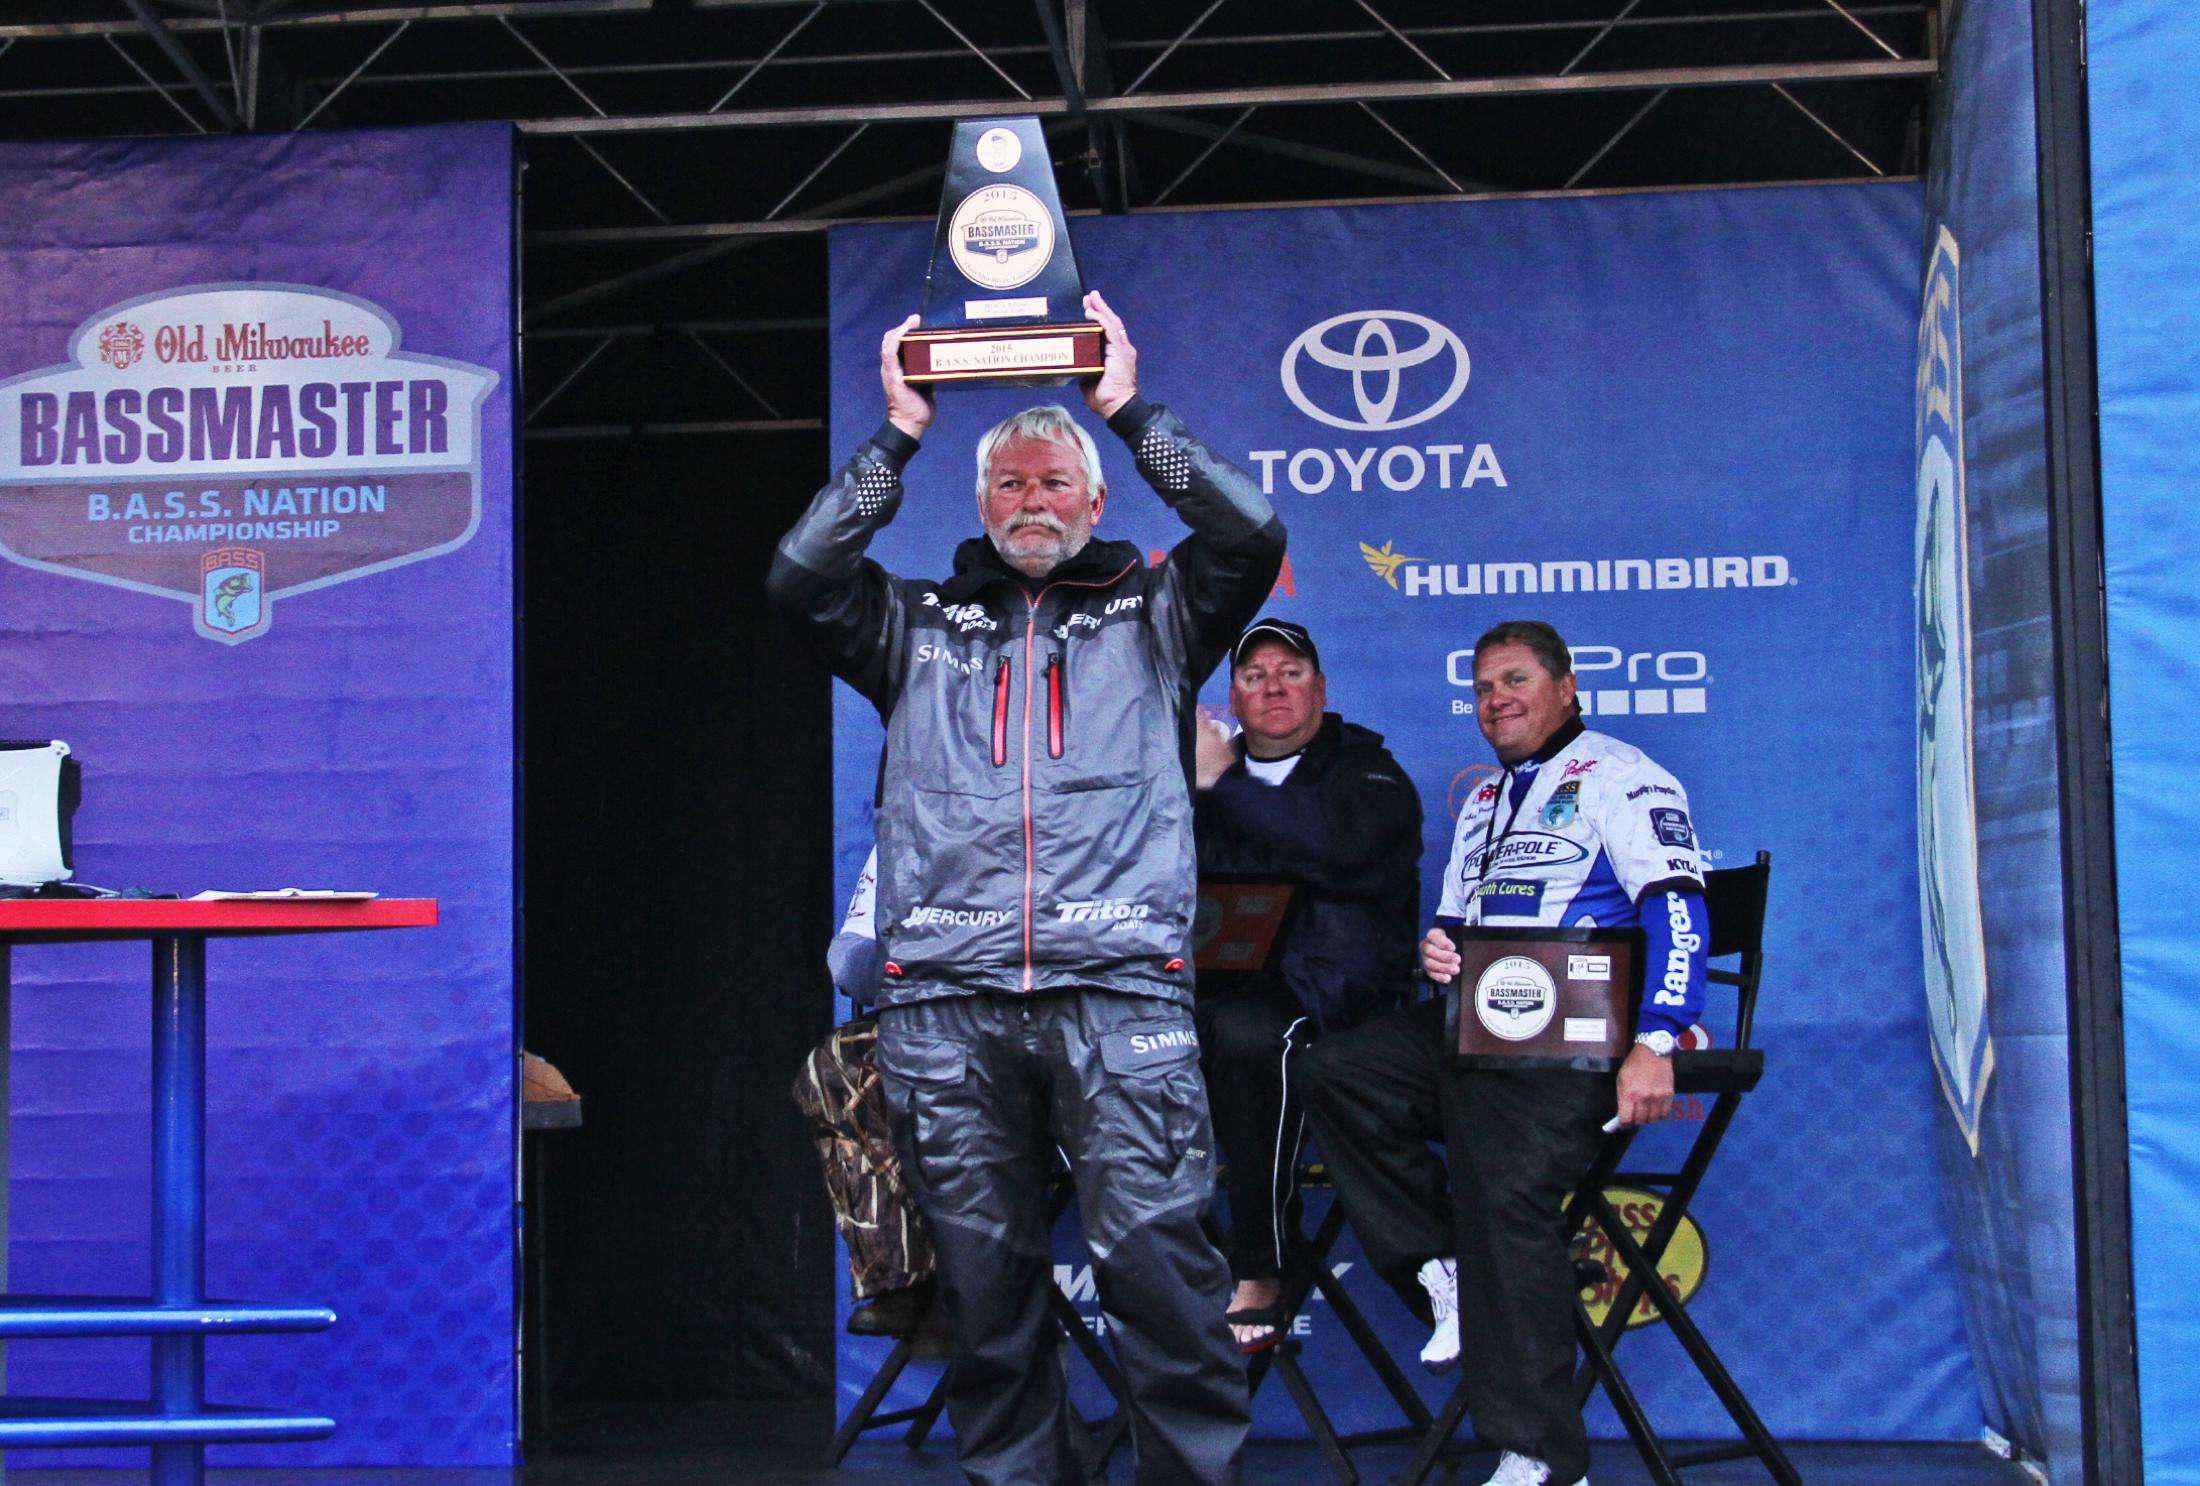 Albert Collins of Nacogdoches, Texas, hoists the 2015 B.A.S.S. Nation Championship trophy over his head. The victory earned him an invitation to fish the 2016 Bassmaster Elite Series, and by winning the Central Division, he earned a berth to the Bassmaster Classic in March 2016.